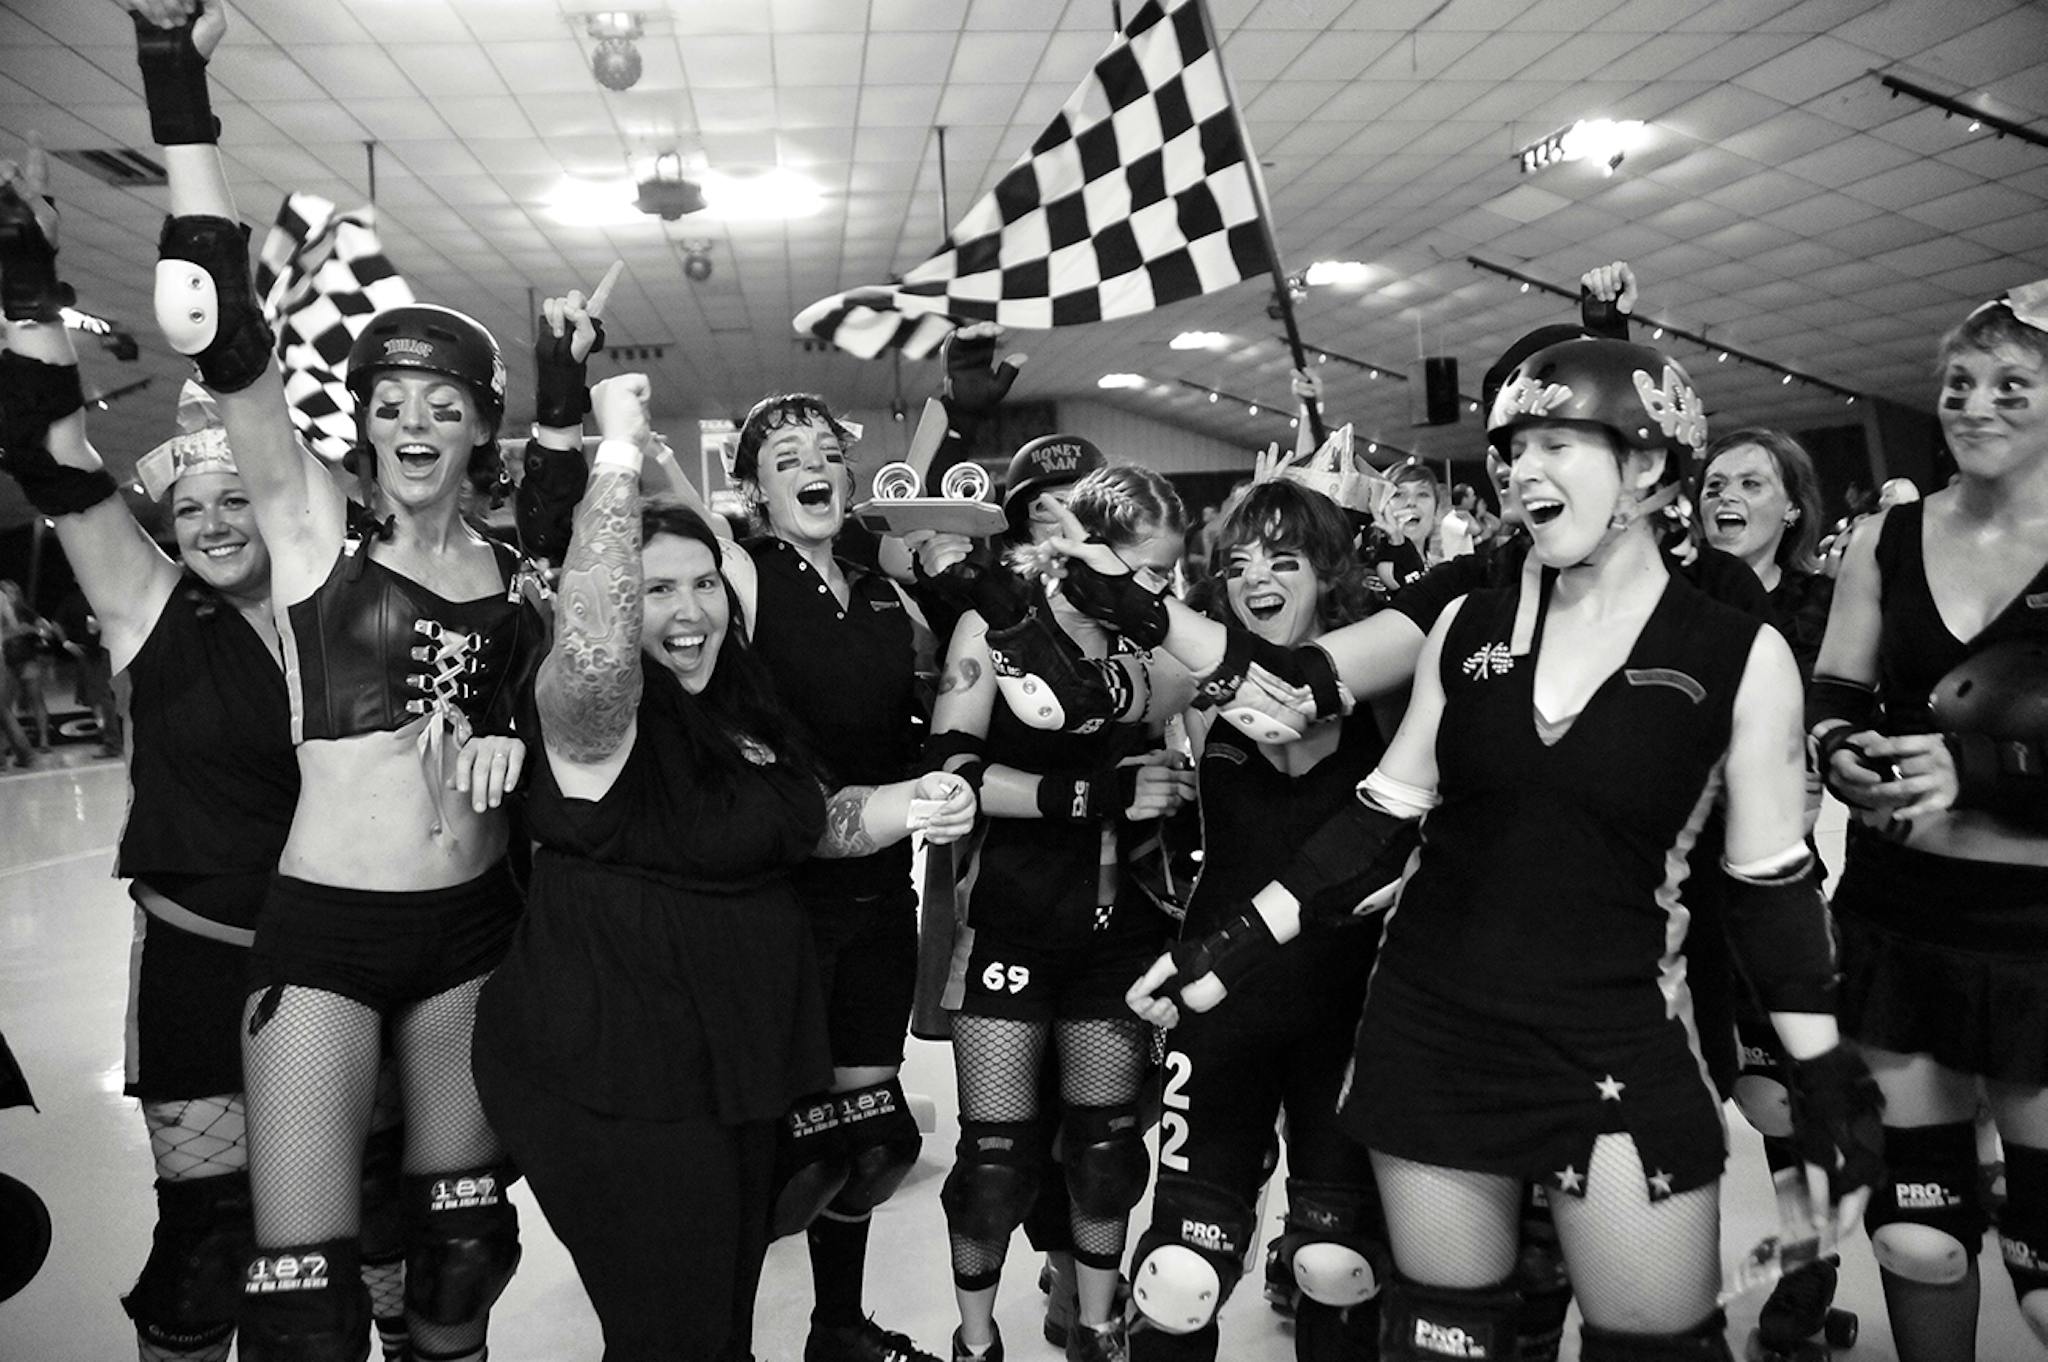 Texas Rollergirls team the Hot Rods celebrate after winning the 2009 Austin championship